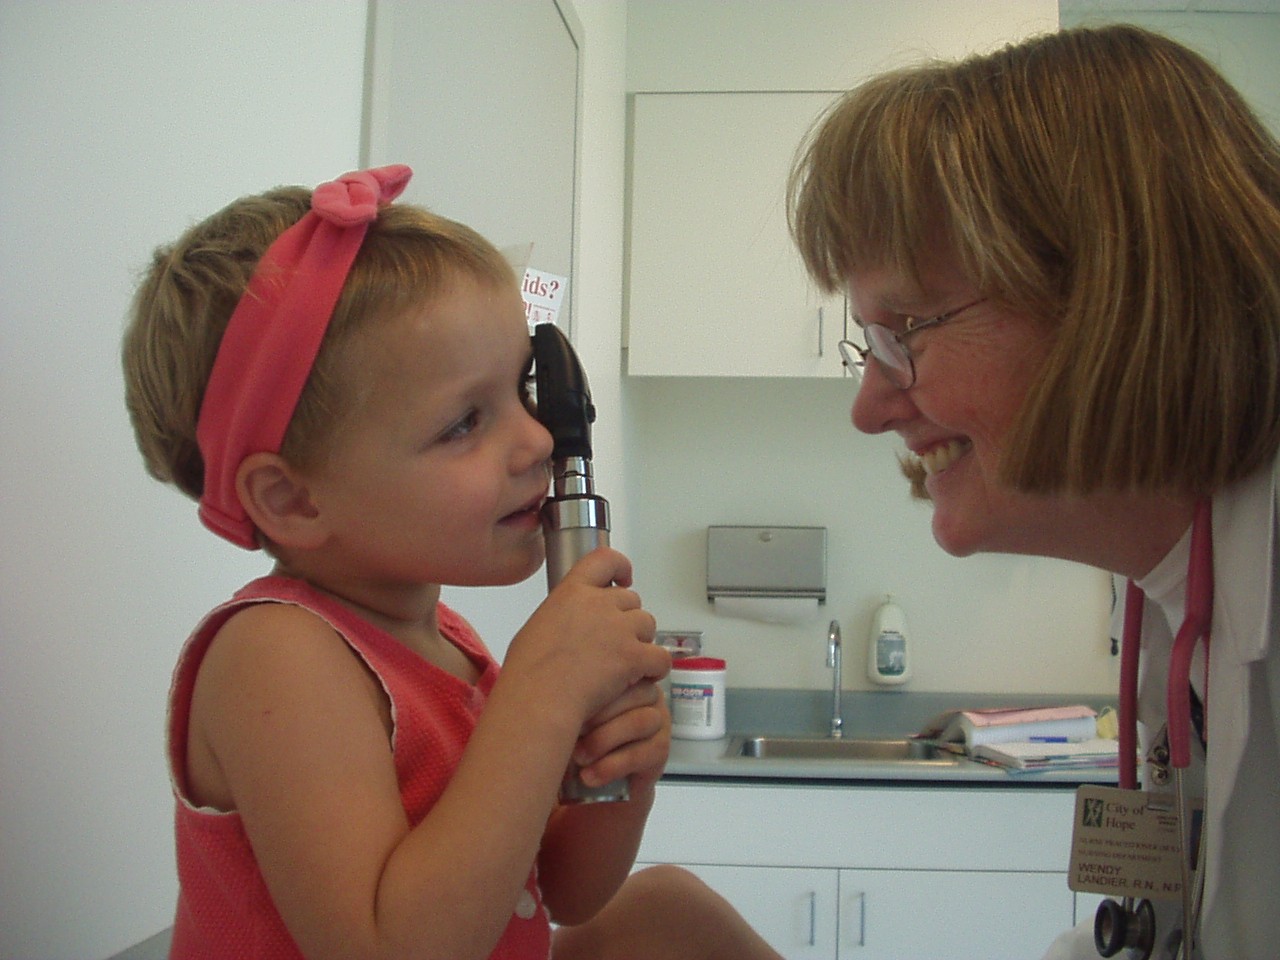 Little girl with red headband and shirt holding medical instrument next to a woman with glasses